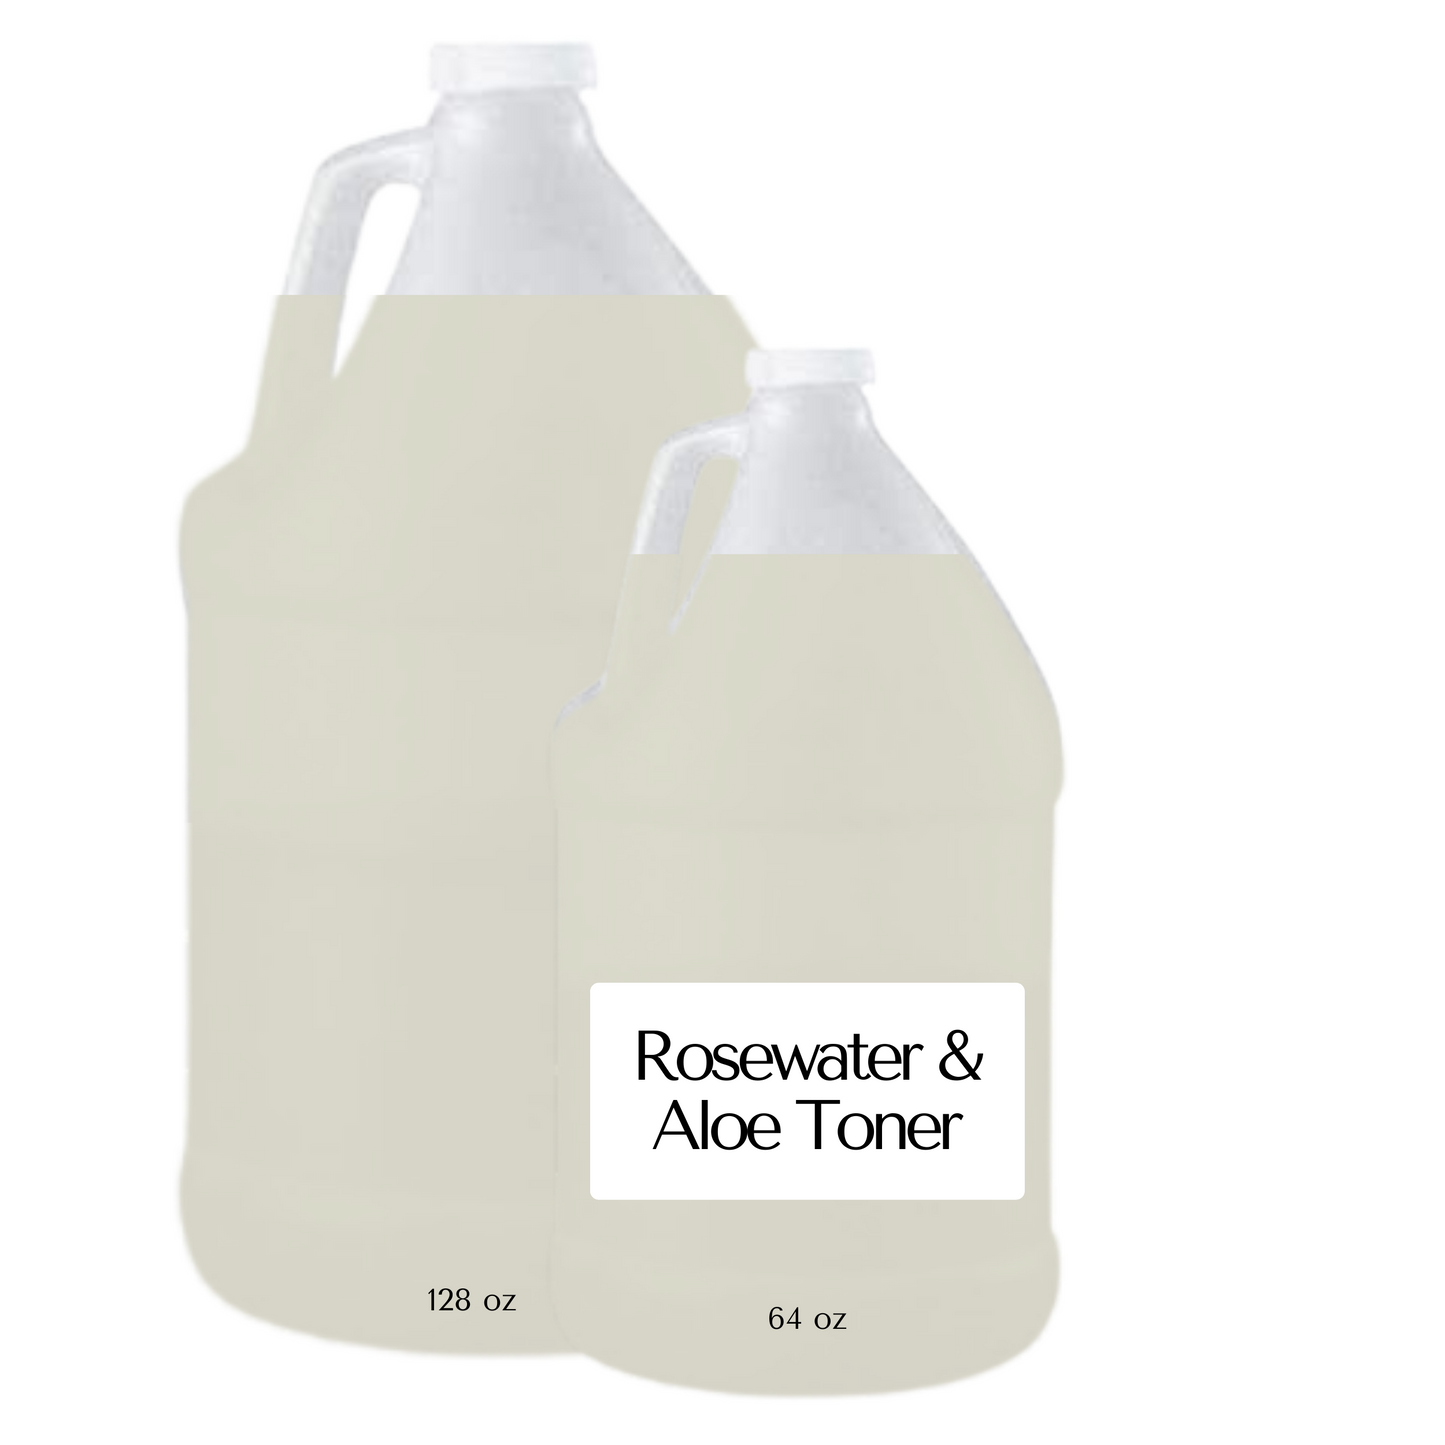 Bulk - Rosewater & Aloe Toner - You Package and Label